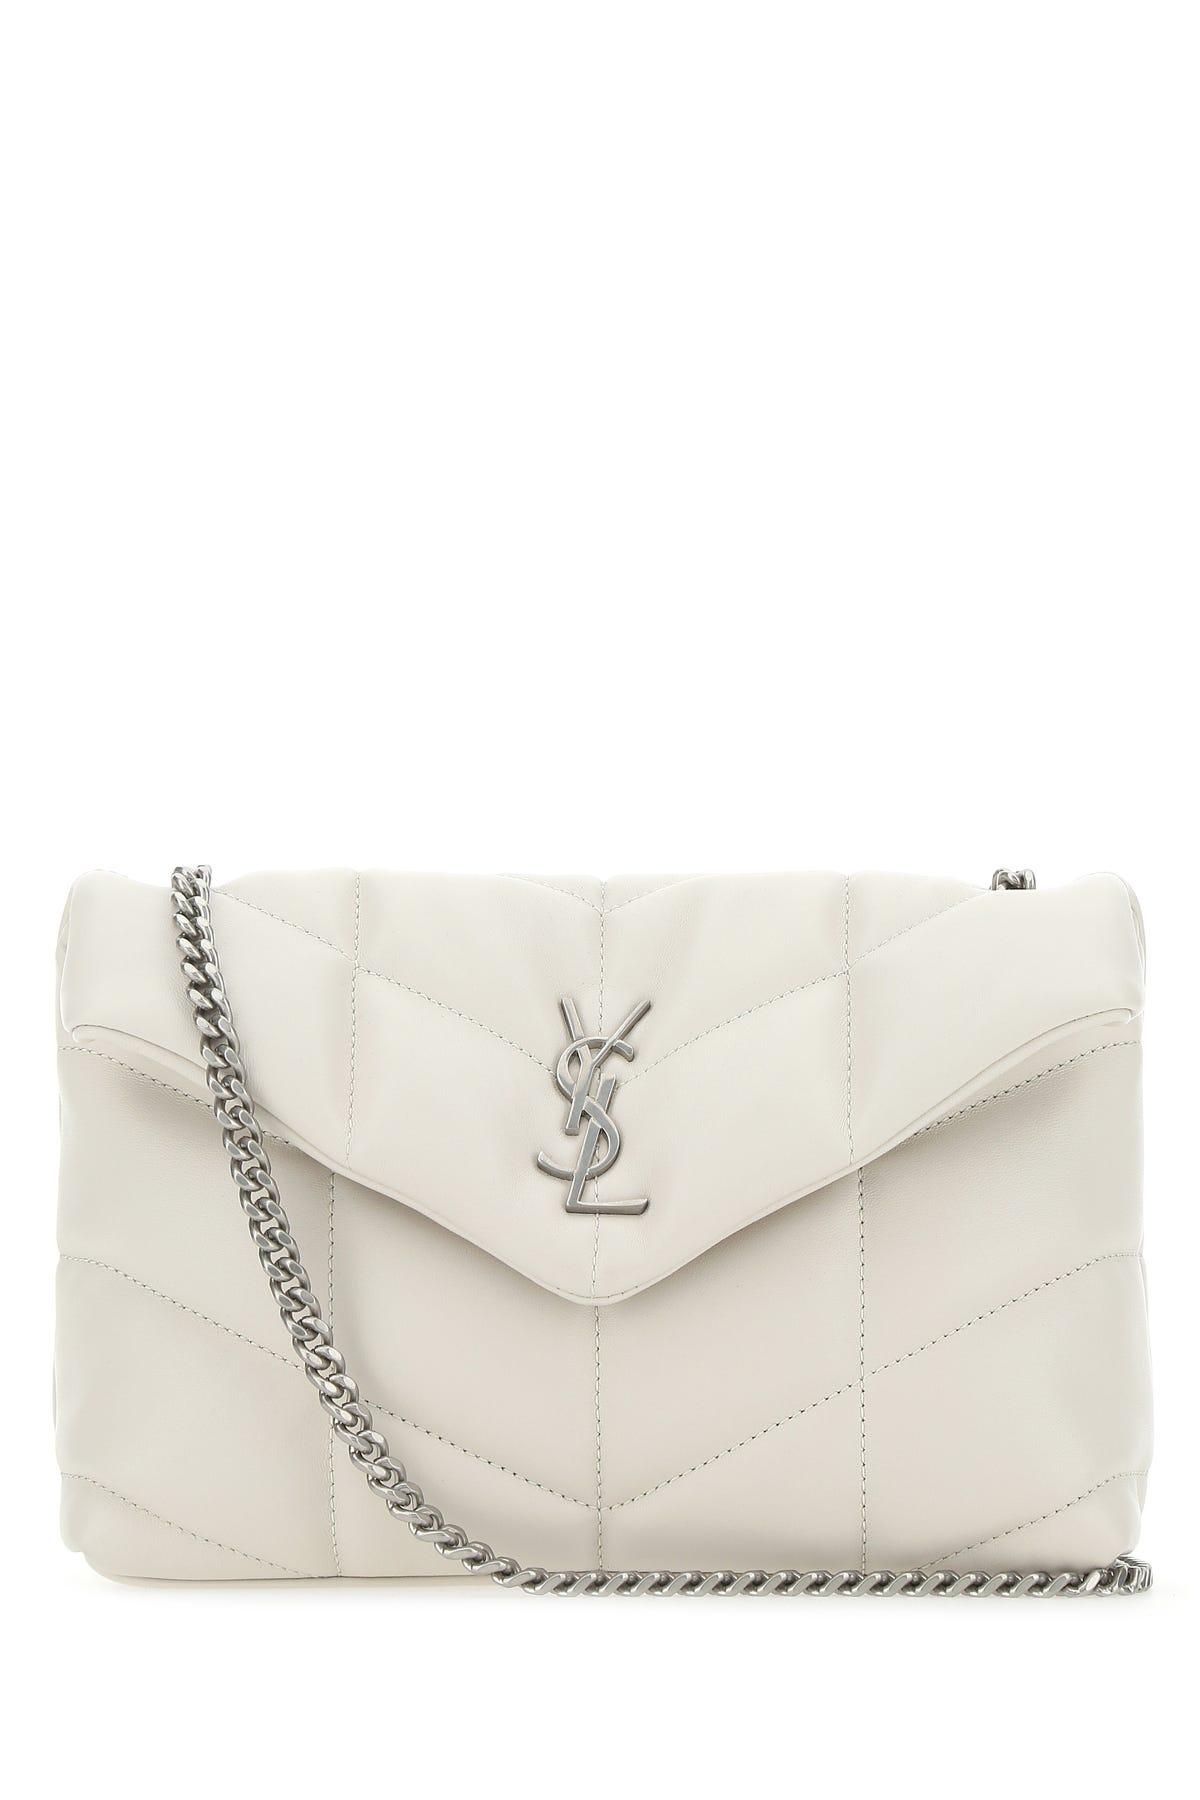 Saint Laurent Mini Loulou Puffer Leather Crossbody Bag in White - Save 40%  | Lyst